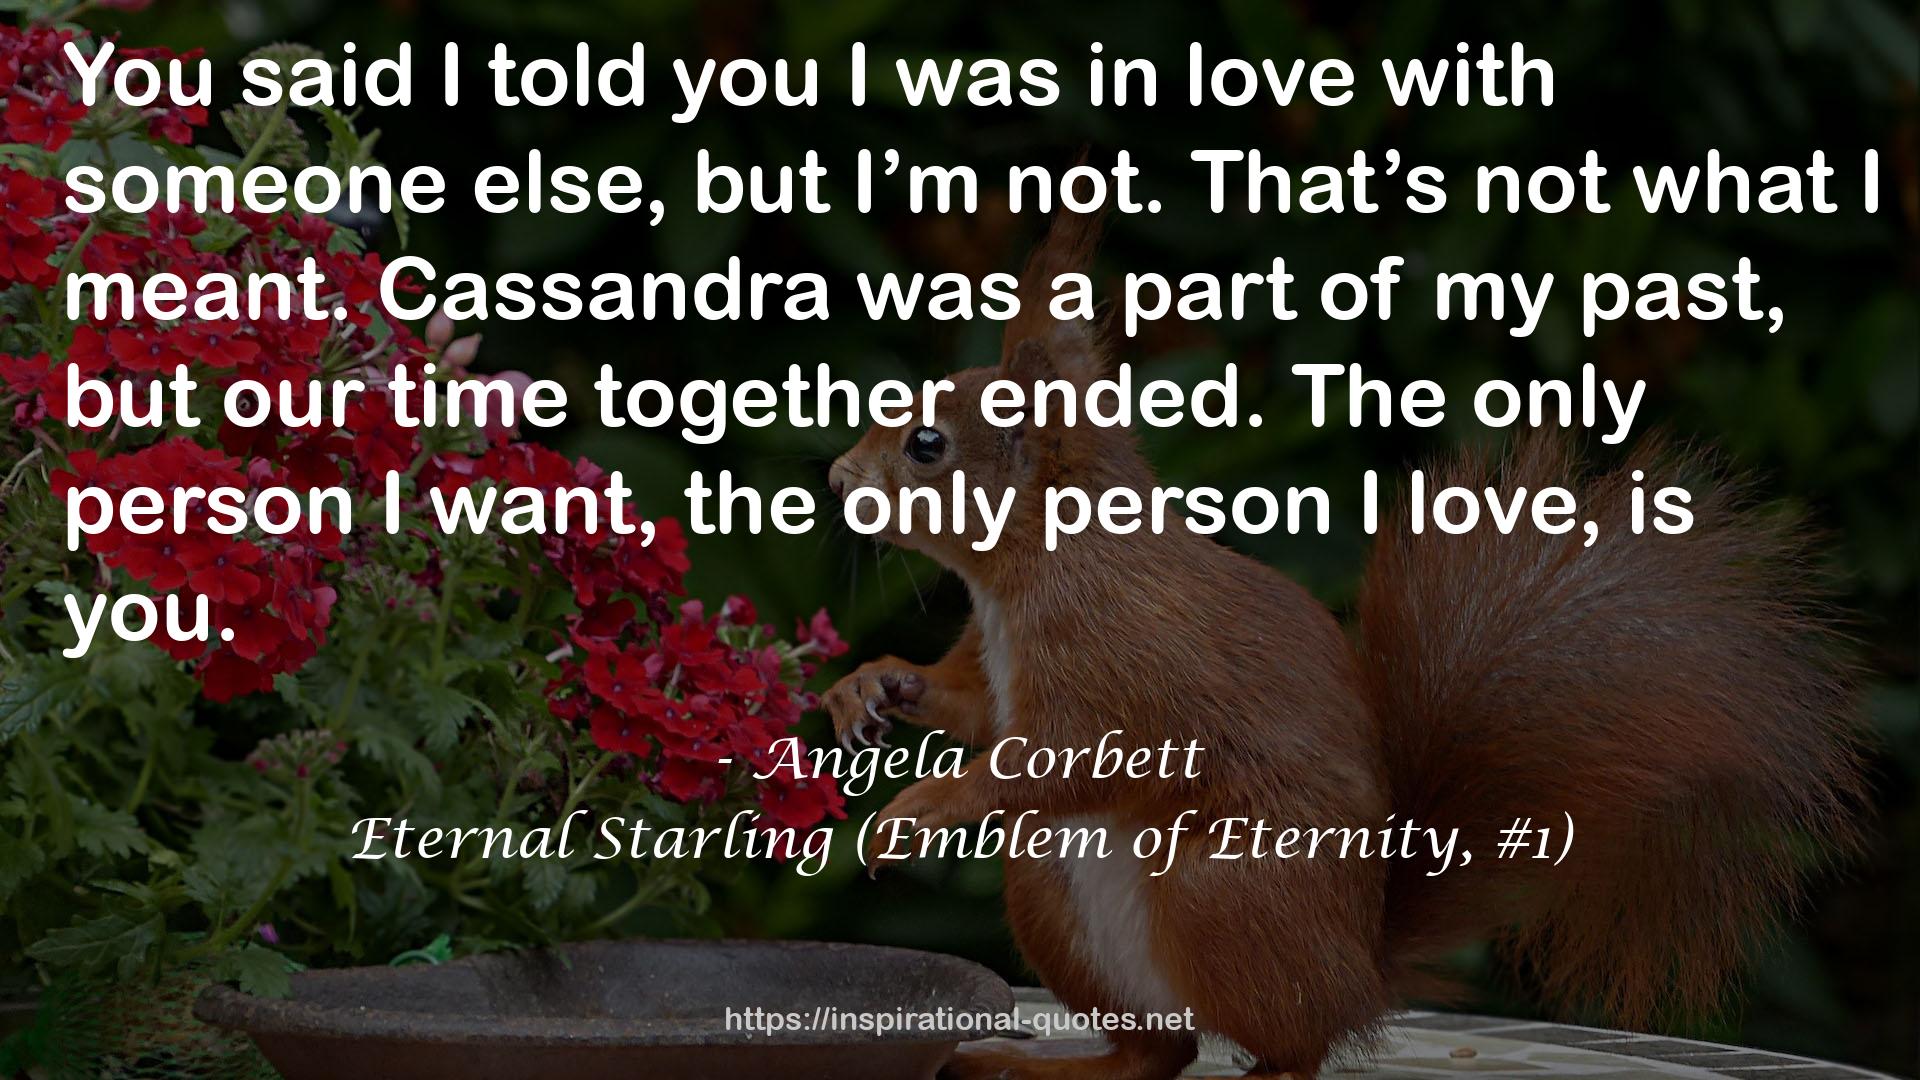 Eternal Starling (Emblem of Eternity, #1) QUOTES